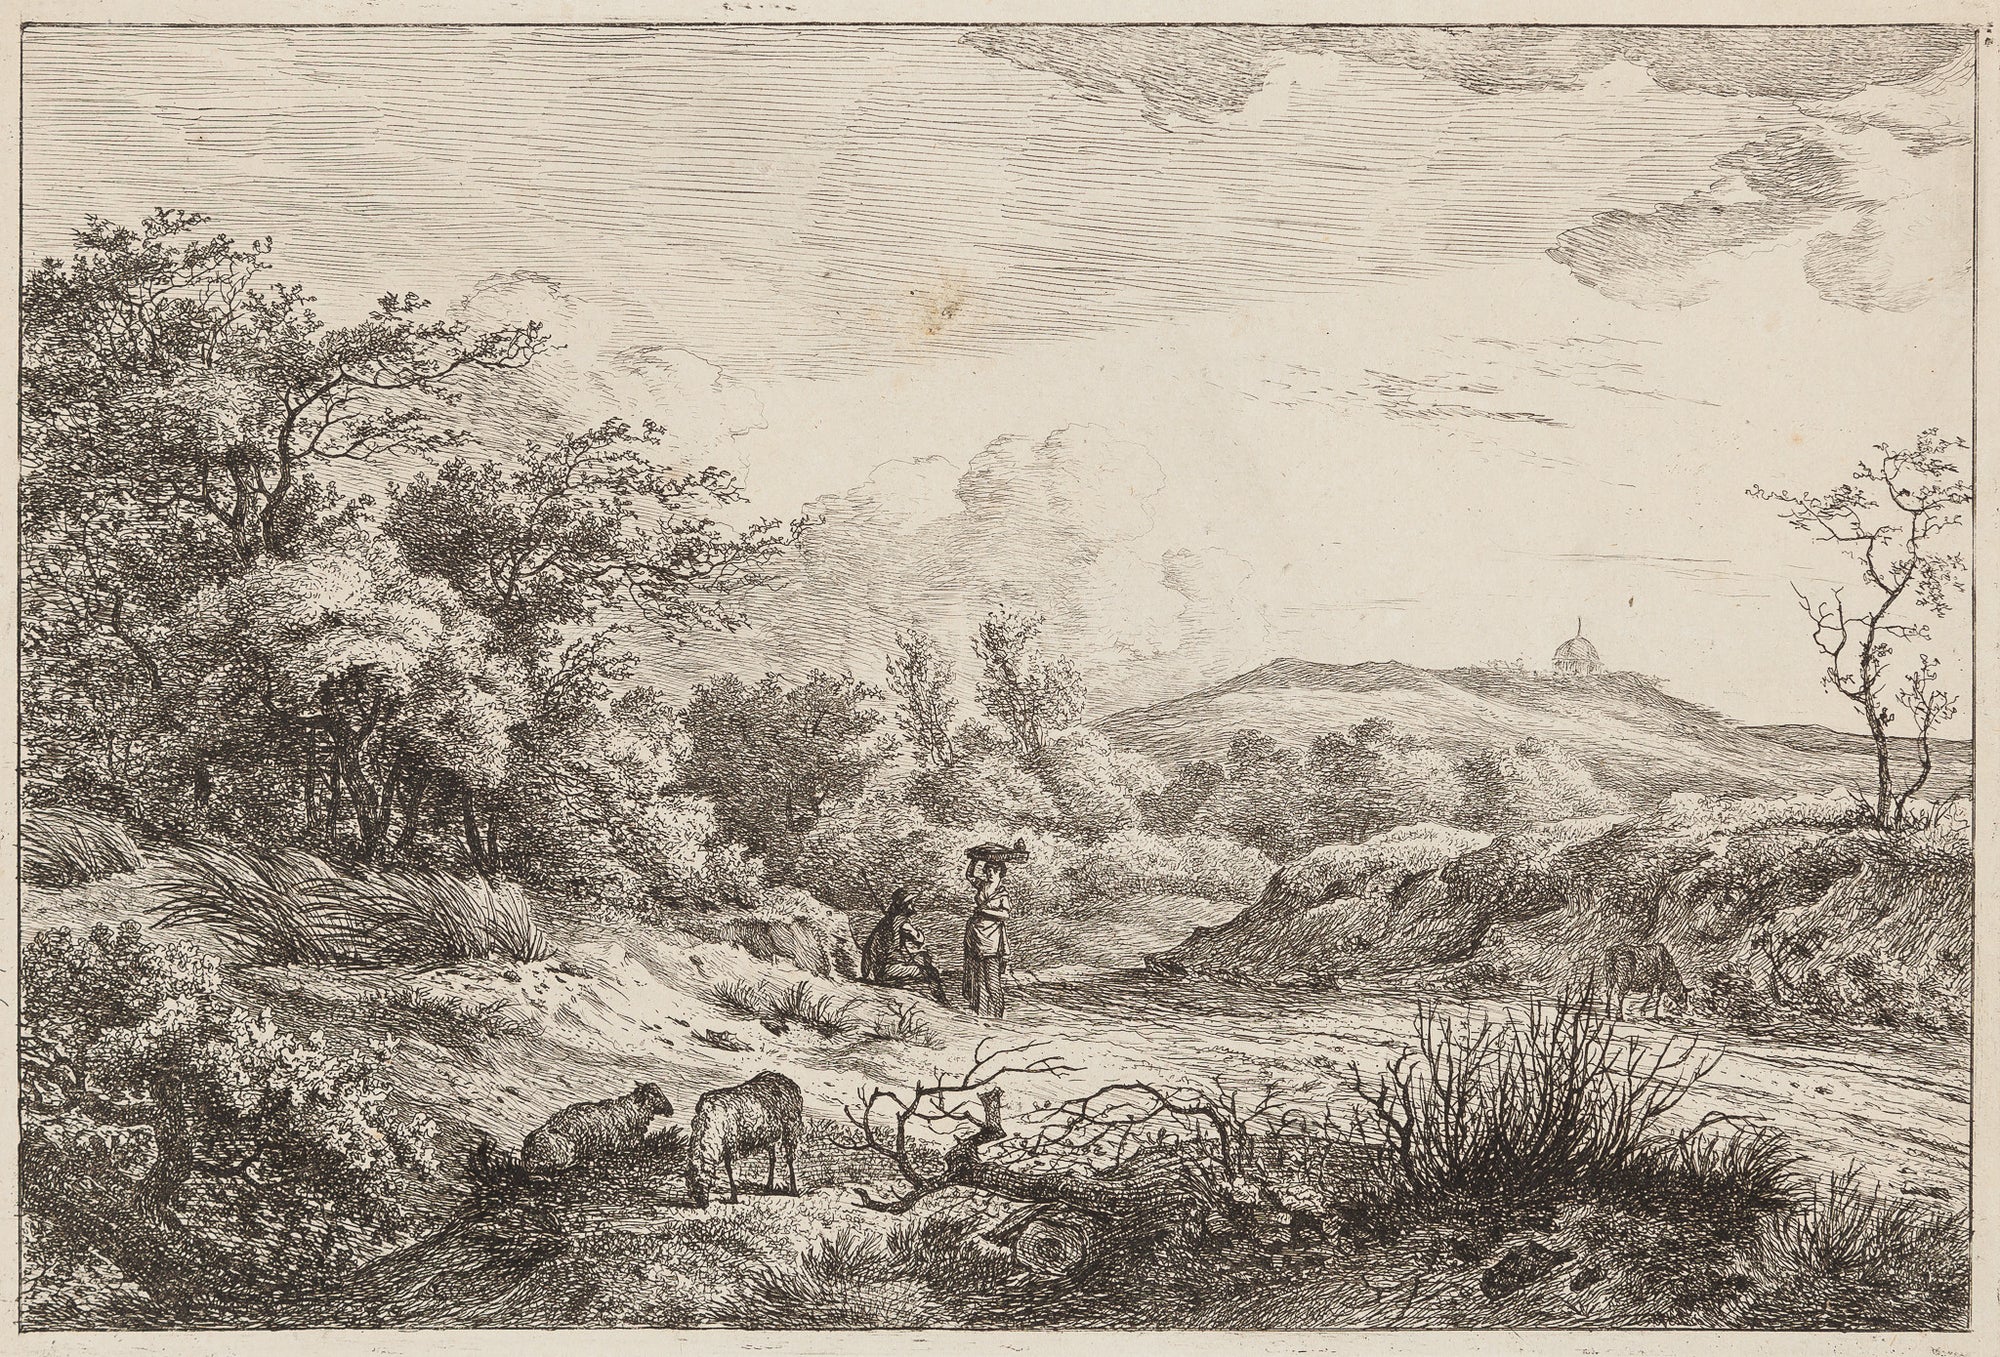 Antieke prent. Antique print. Etching from ca. 1800 by Hermanus Fock (Dutch artist famous for his etchings and drawings of landscapes and dunes in surroundings of Haarlem, Amsterdam Zandvoort.). This lovely etching shows, according to the handwritten text at the bottom of the paper: 'the dunes behind, what today is, the 'Seinpostduin' with the cupola of the late Rev. Faassen de Heer. etching, antique print, dutch, landscape, scheveningen, hermanus fock, seinpostduin